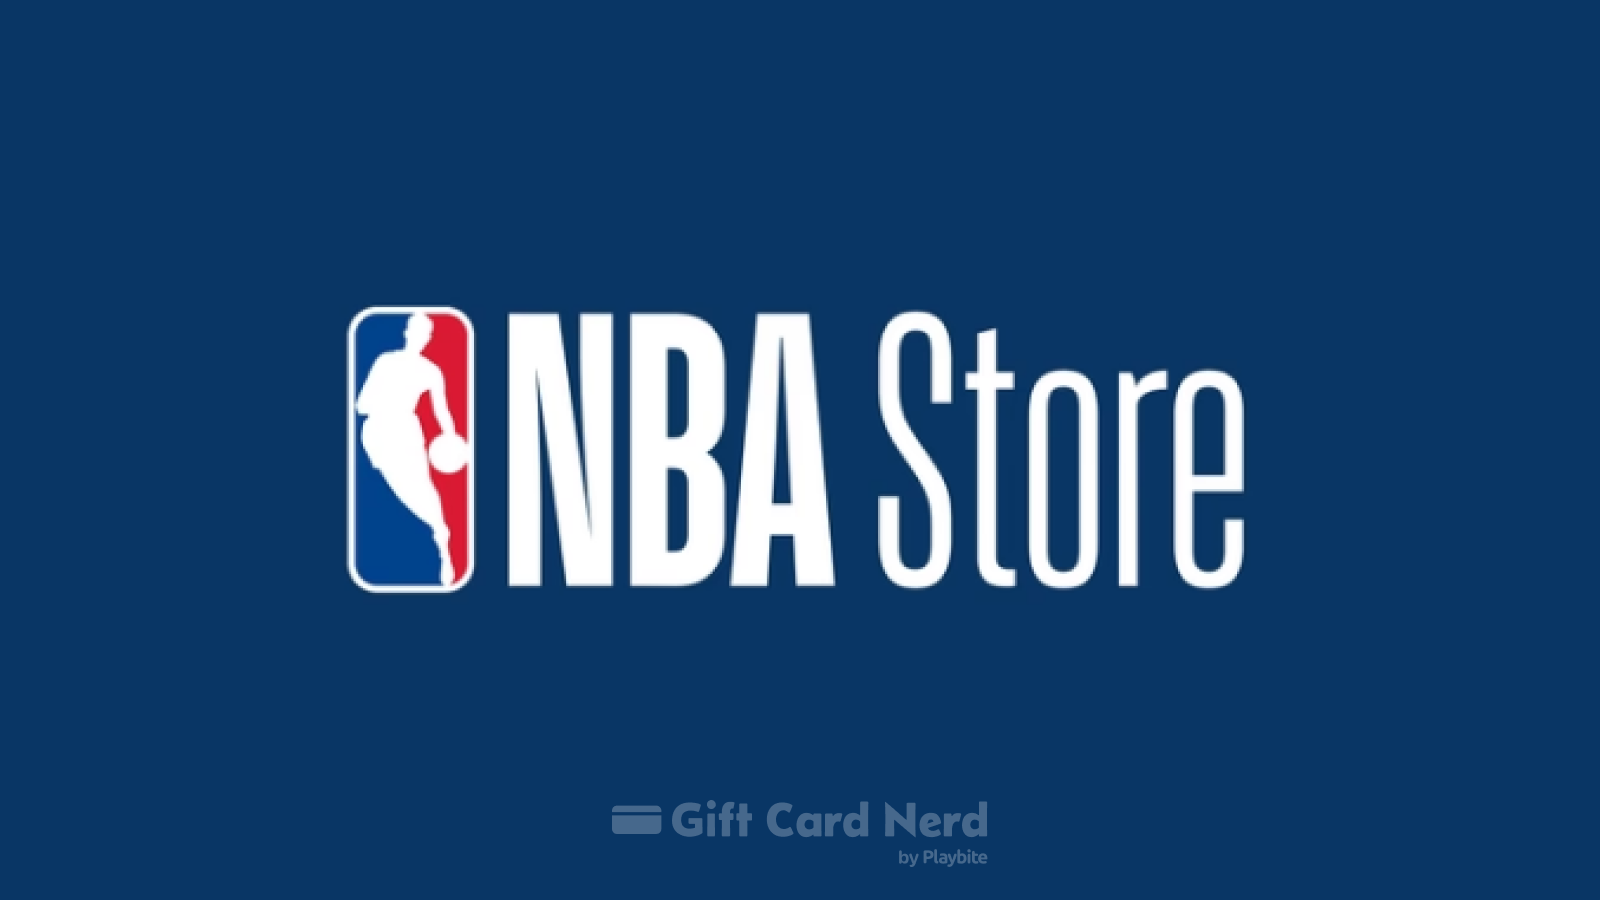 Can I use a NBA Store gift card on Steam?